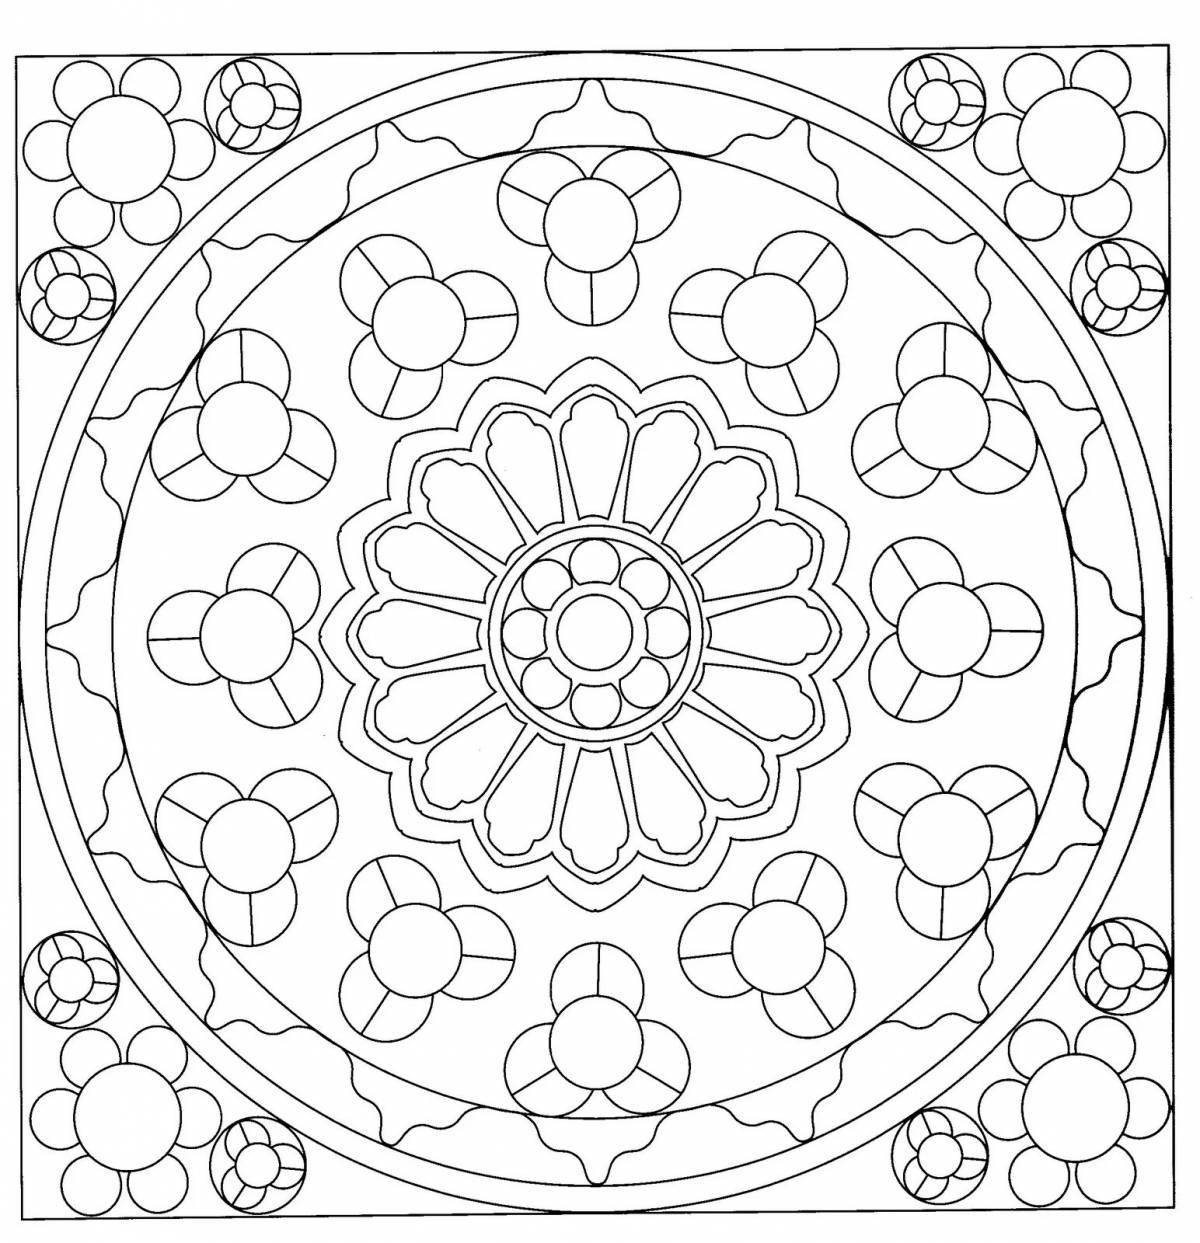 Harmonious coloring mandala of peace and tranquility